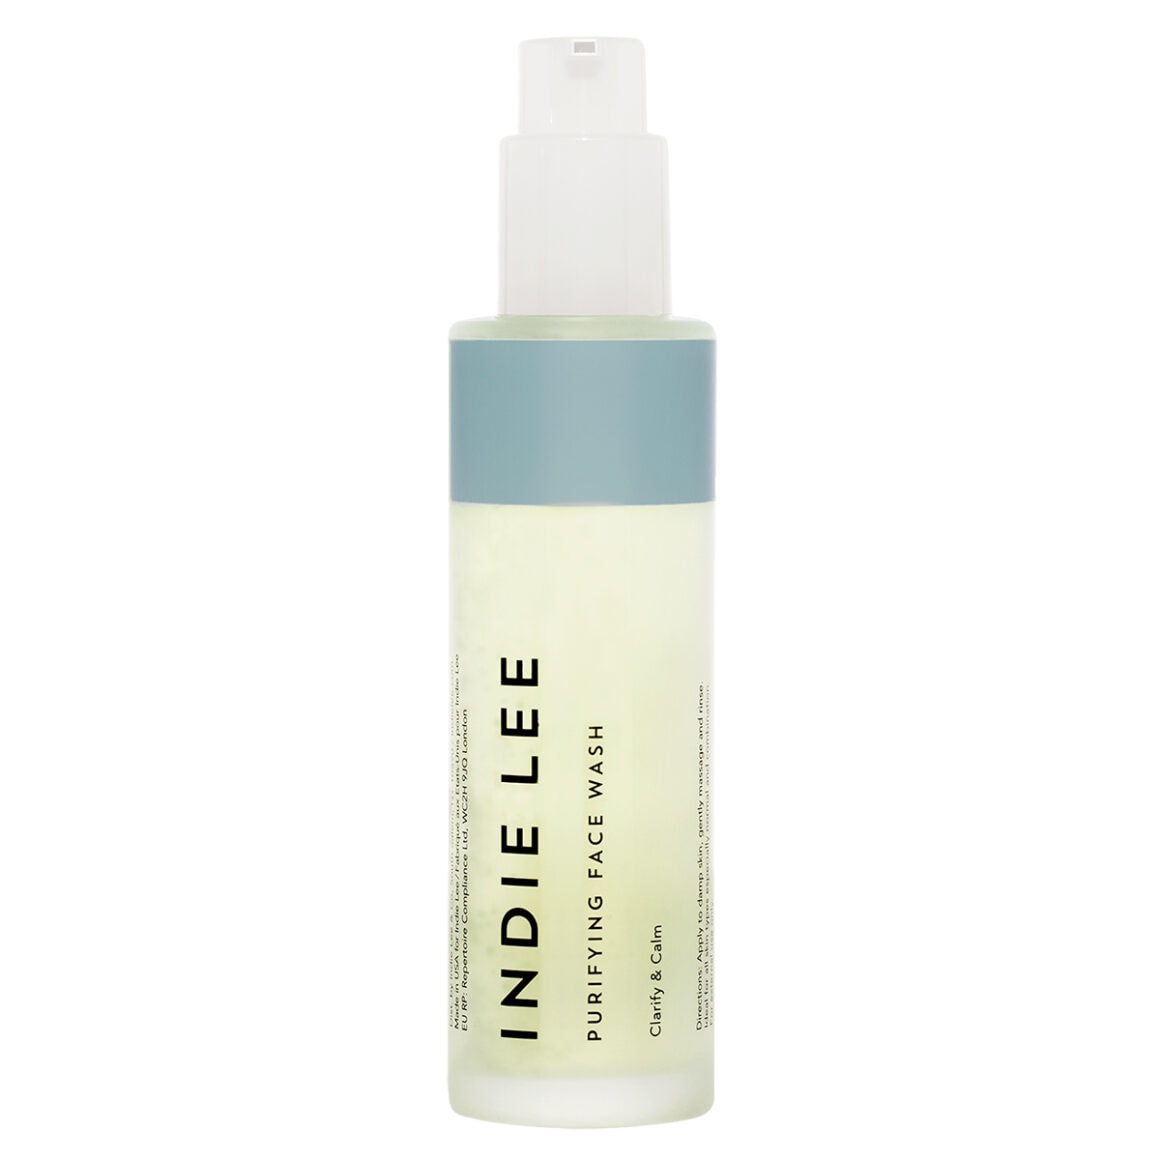 Indie Lee Purifying Face Wash for oily and combination skin.